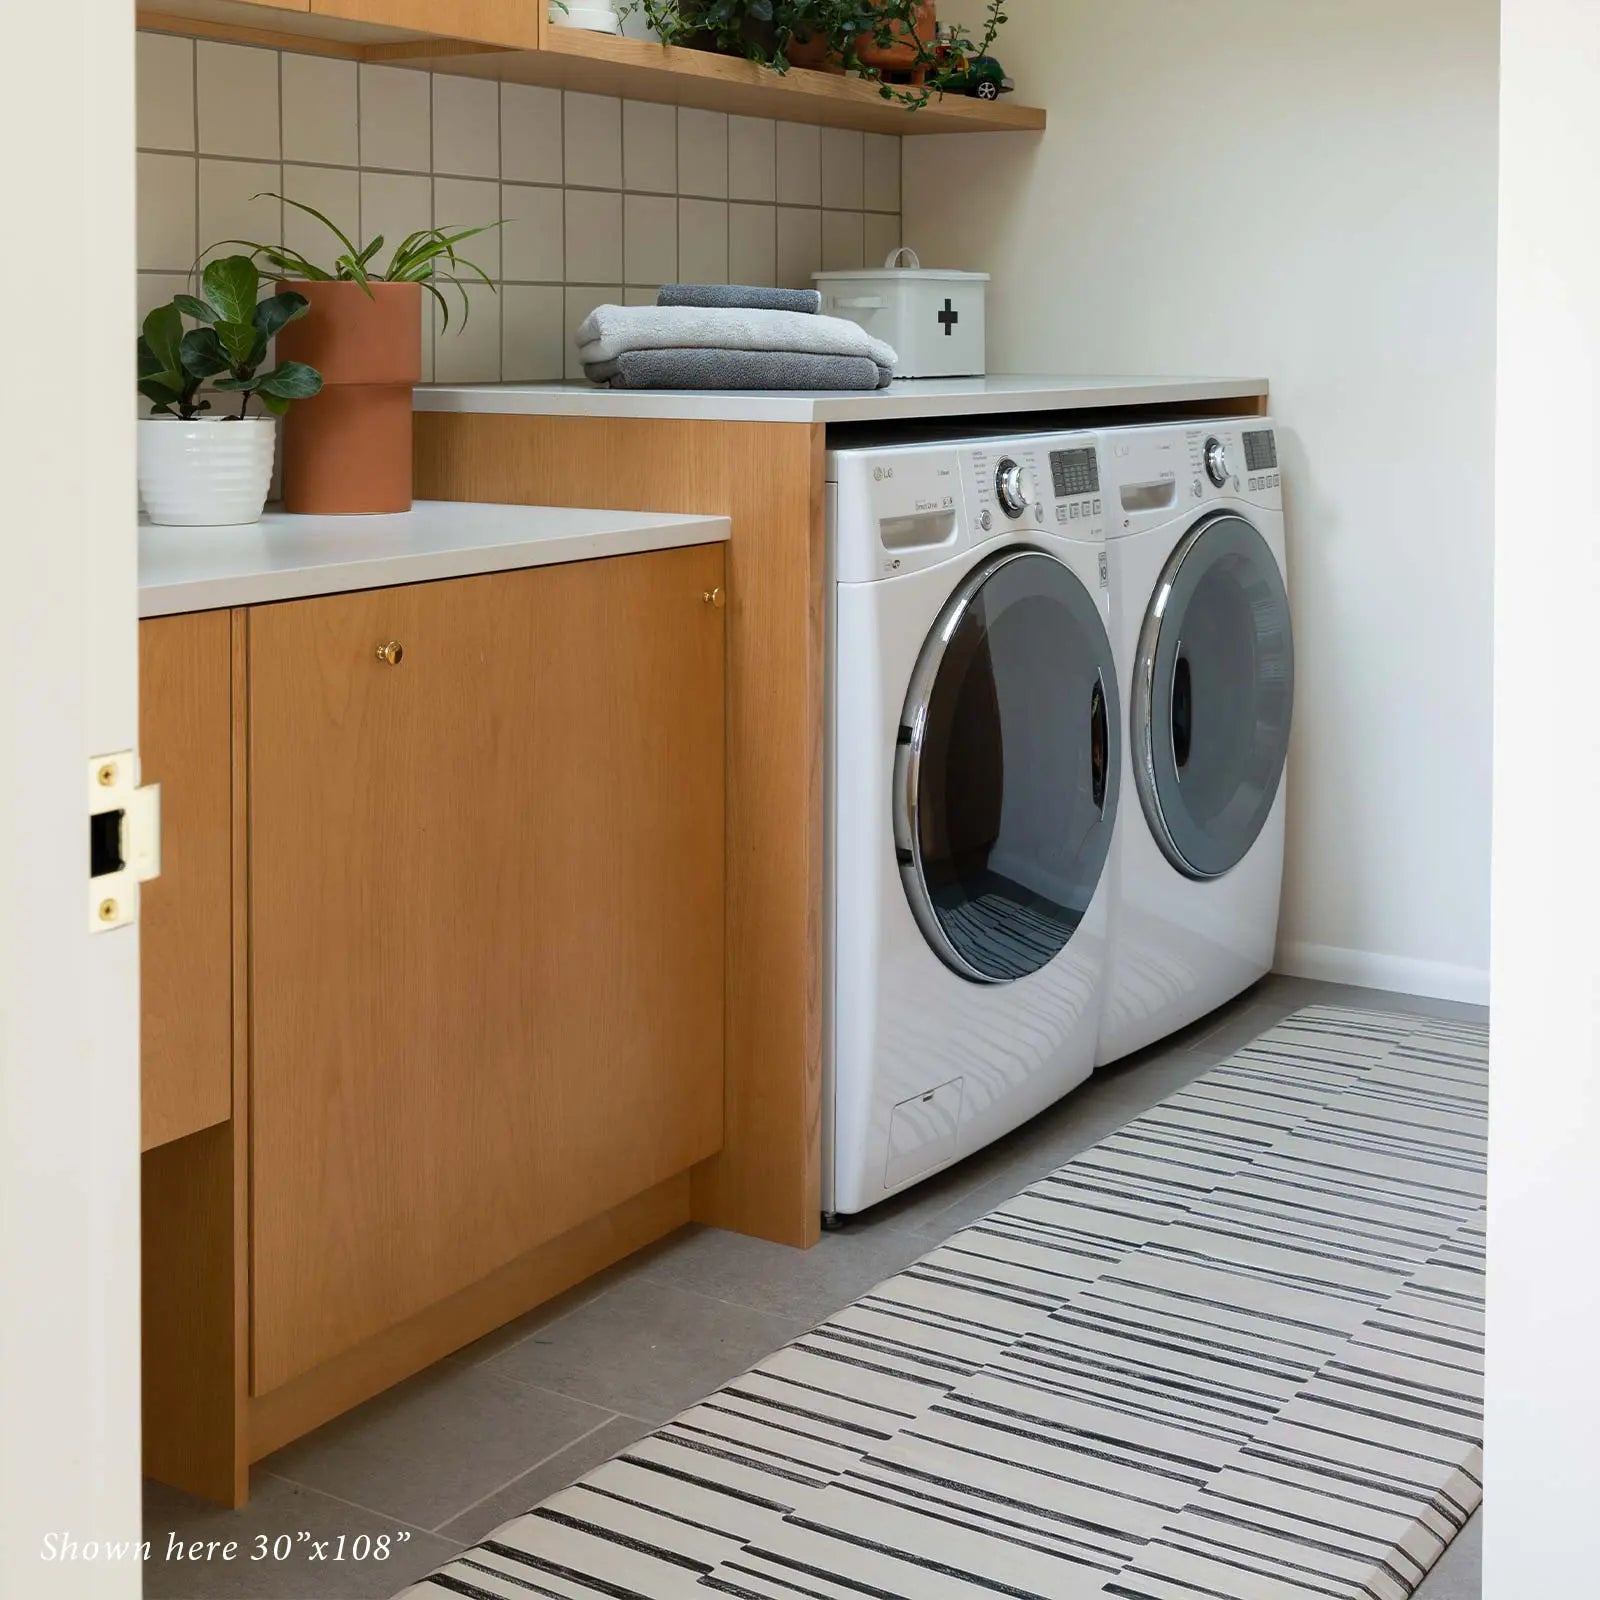 Black and white inverted stripe standing mat in a laundry room in front of washer dryer in size 30x108